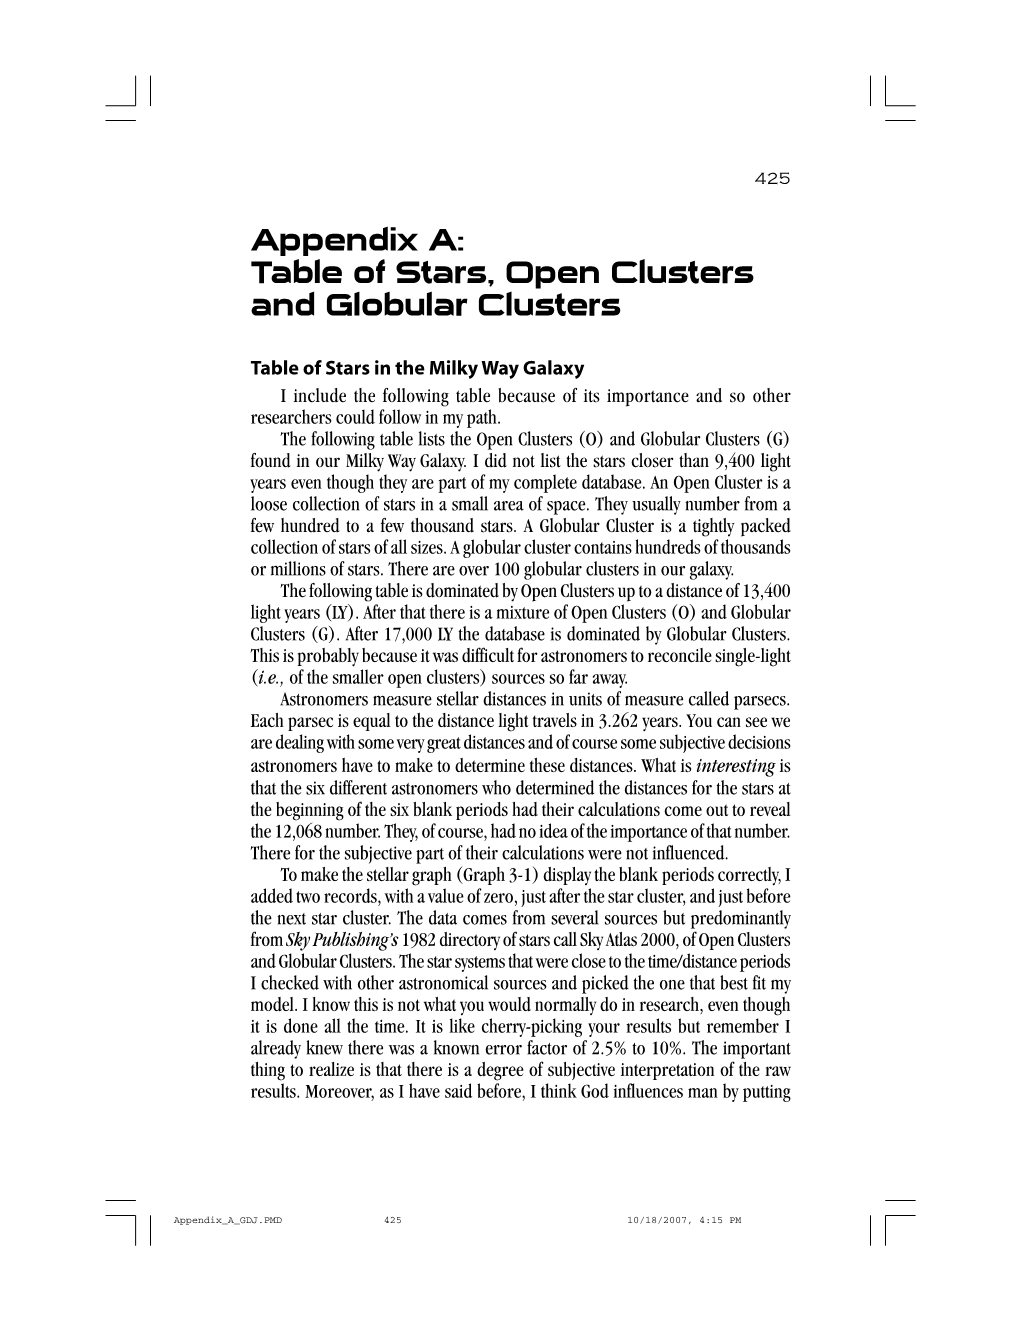 Appendix A: Table of Stars, Open Clusters and Globular Clusters